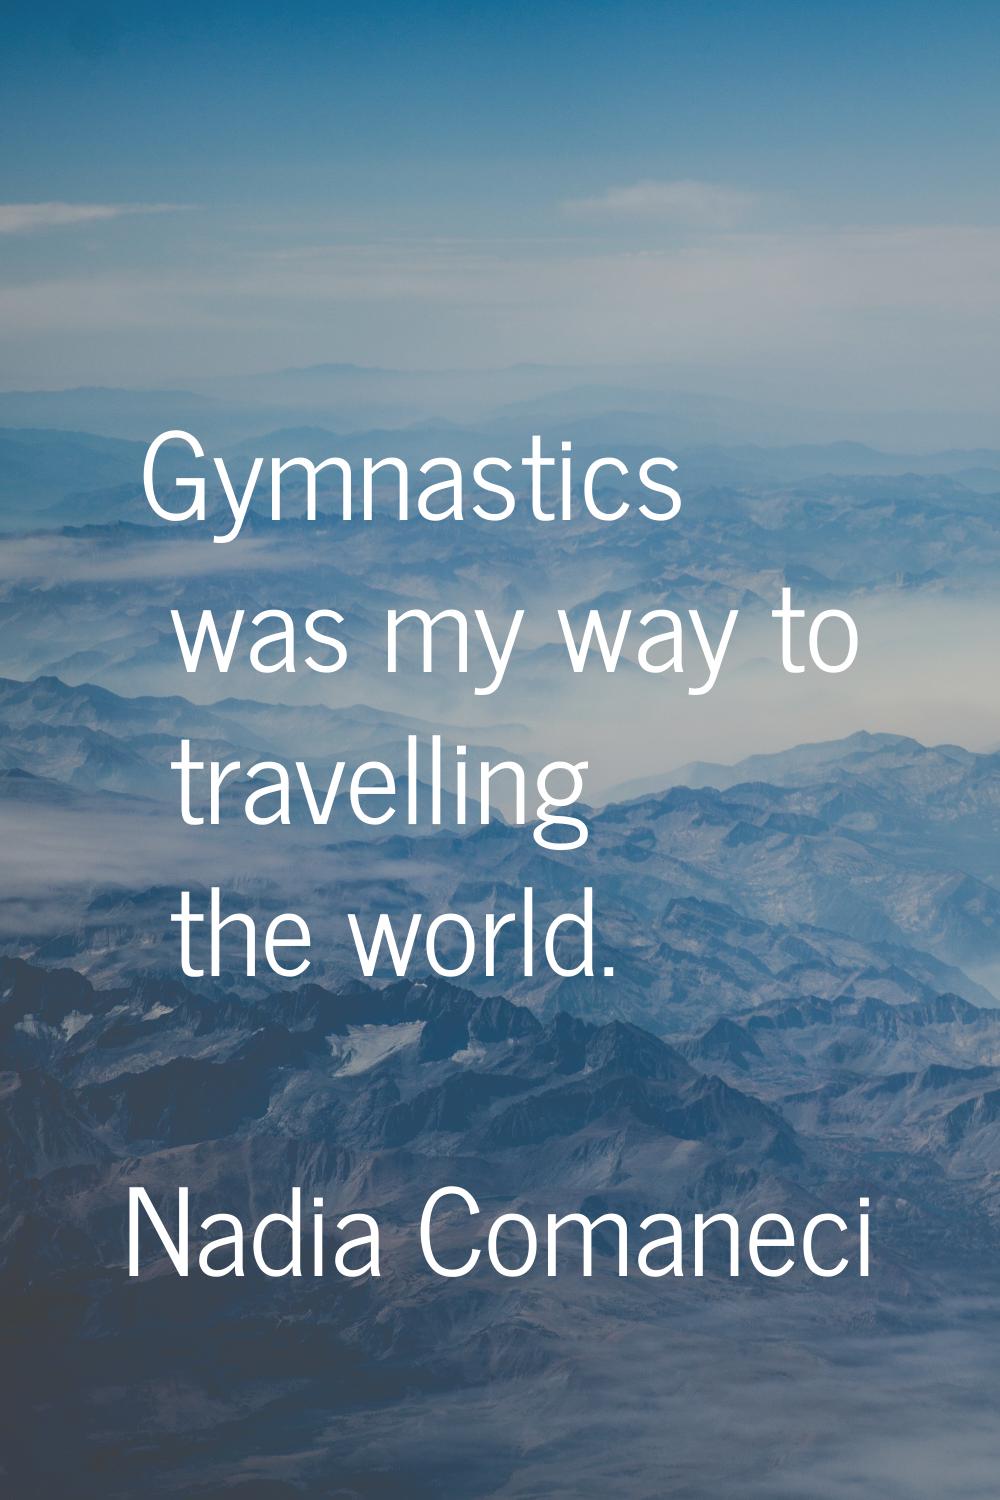 Gymnastics was my way to travelling the world.